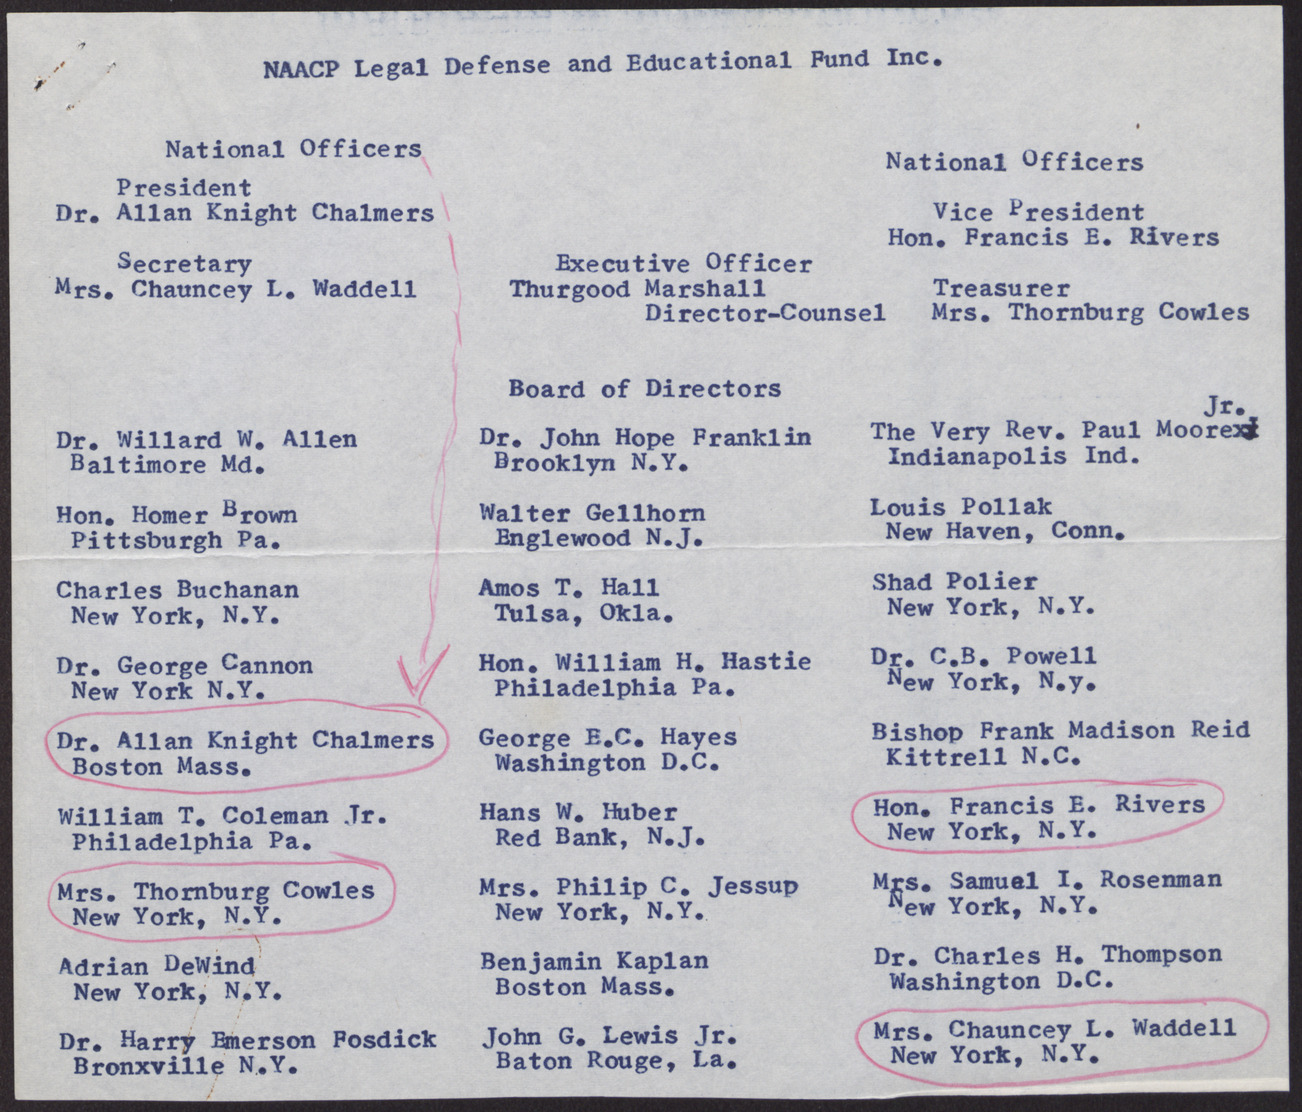 Memo and list of NAACP officers and board directors to Donald Clark from Maggie (3 pages), [1961?], page 2